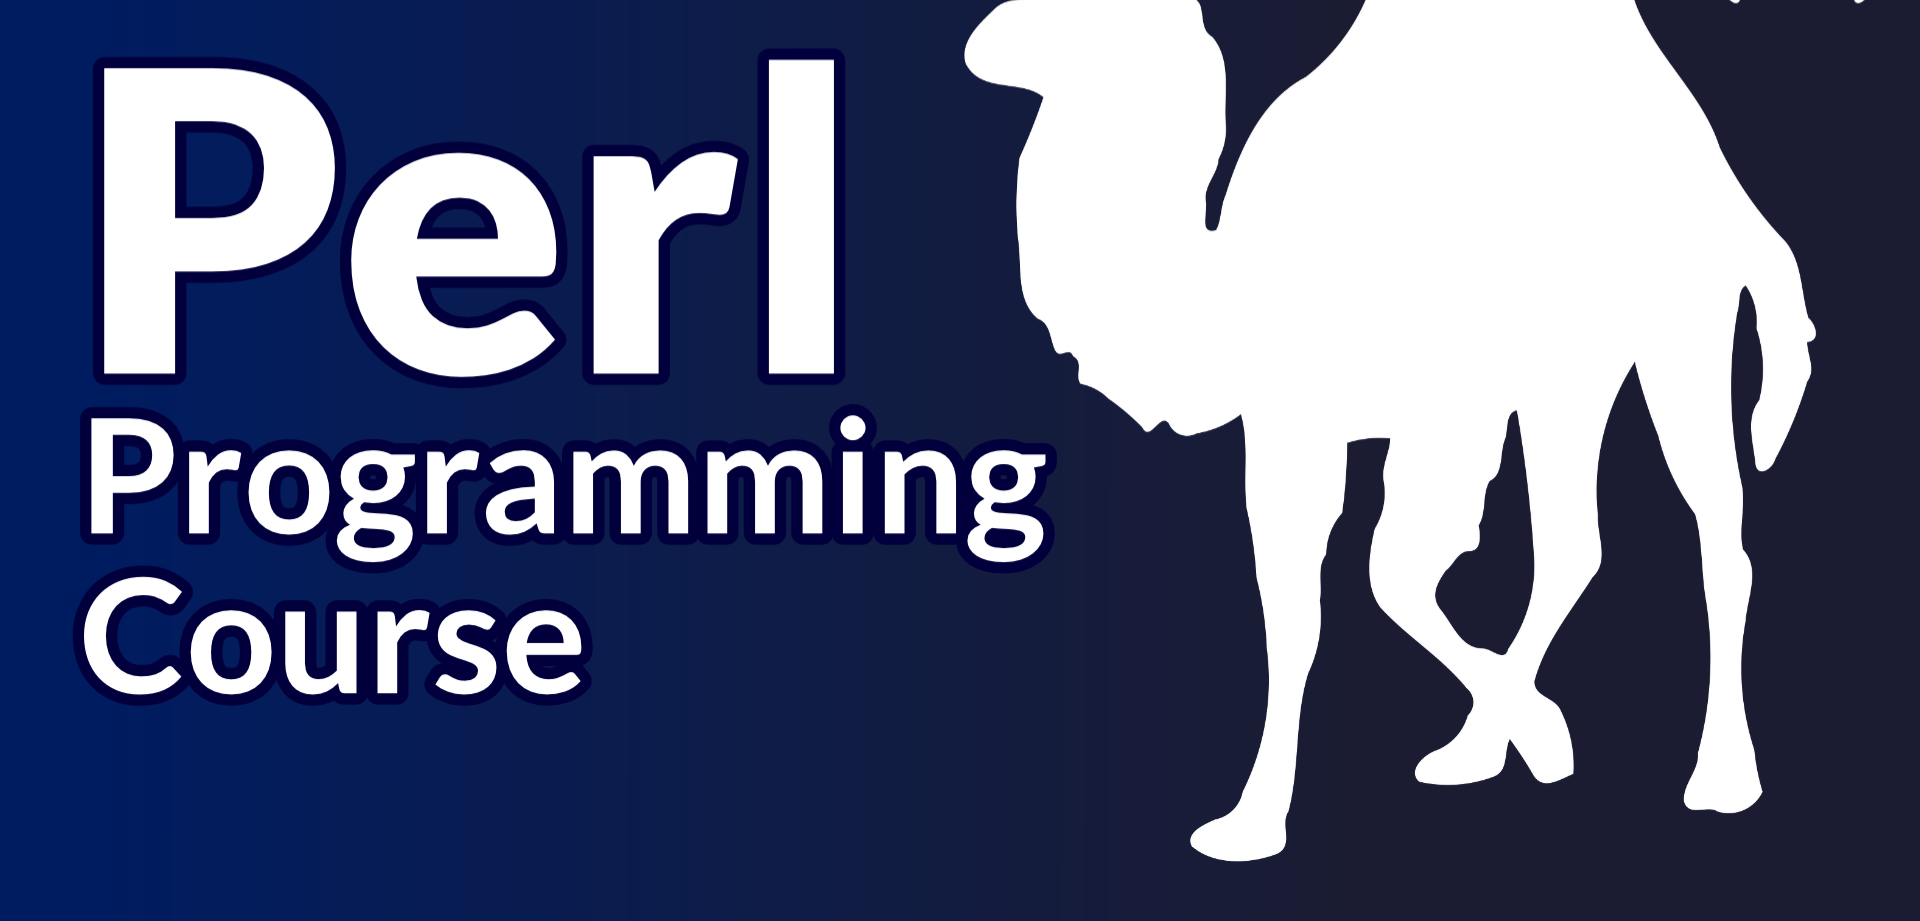 Complete PERL Programming Course